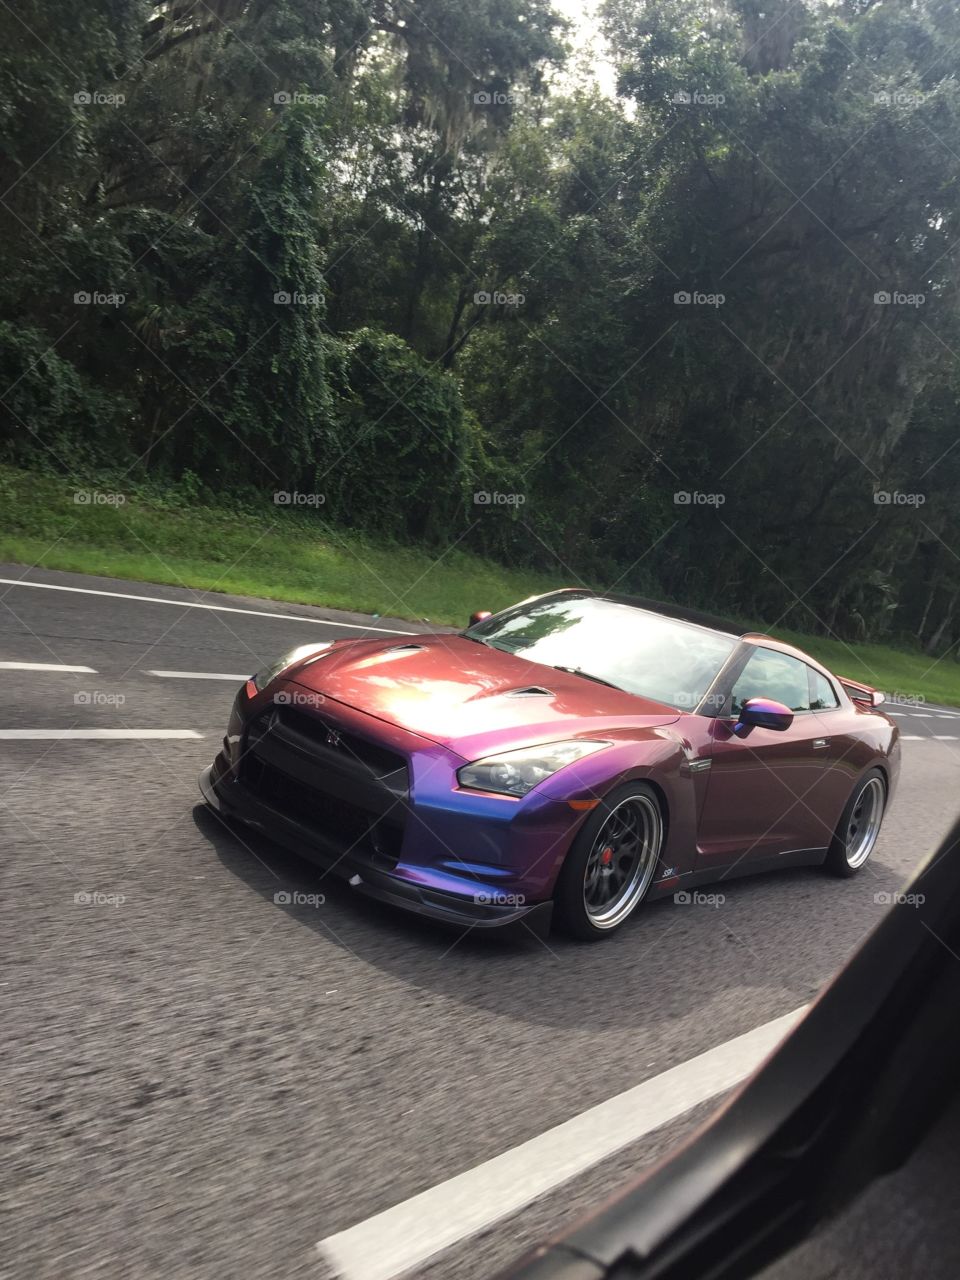 Rolling shot of a GTR I had to chase down to get the shot!